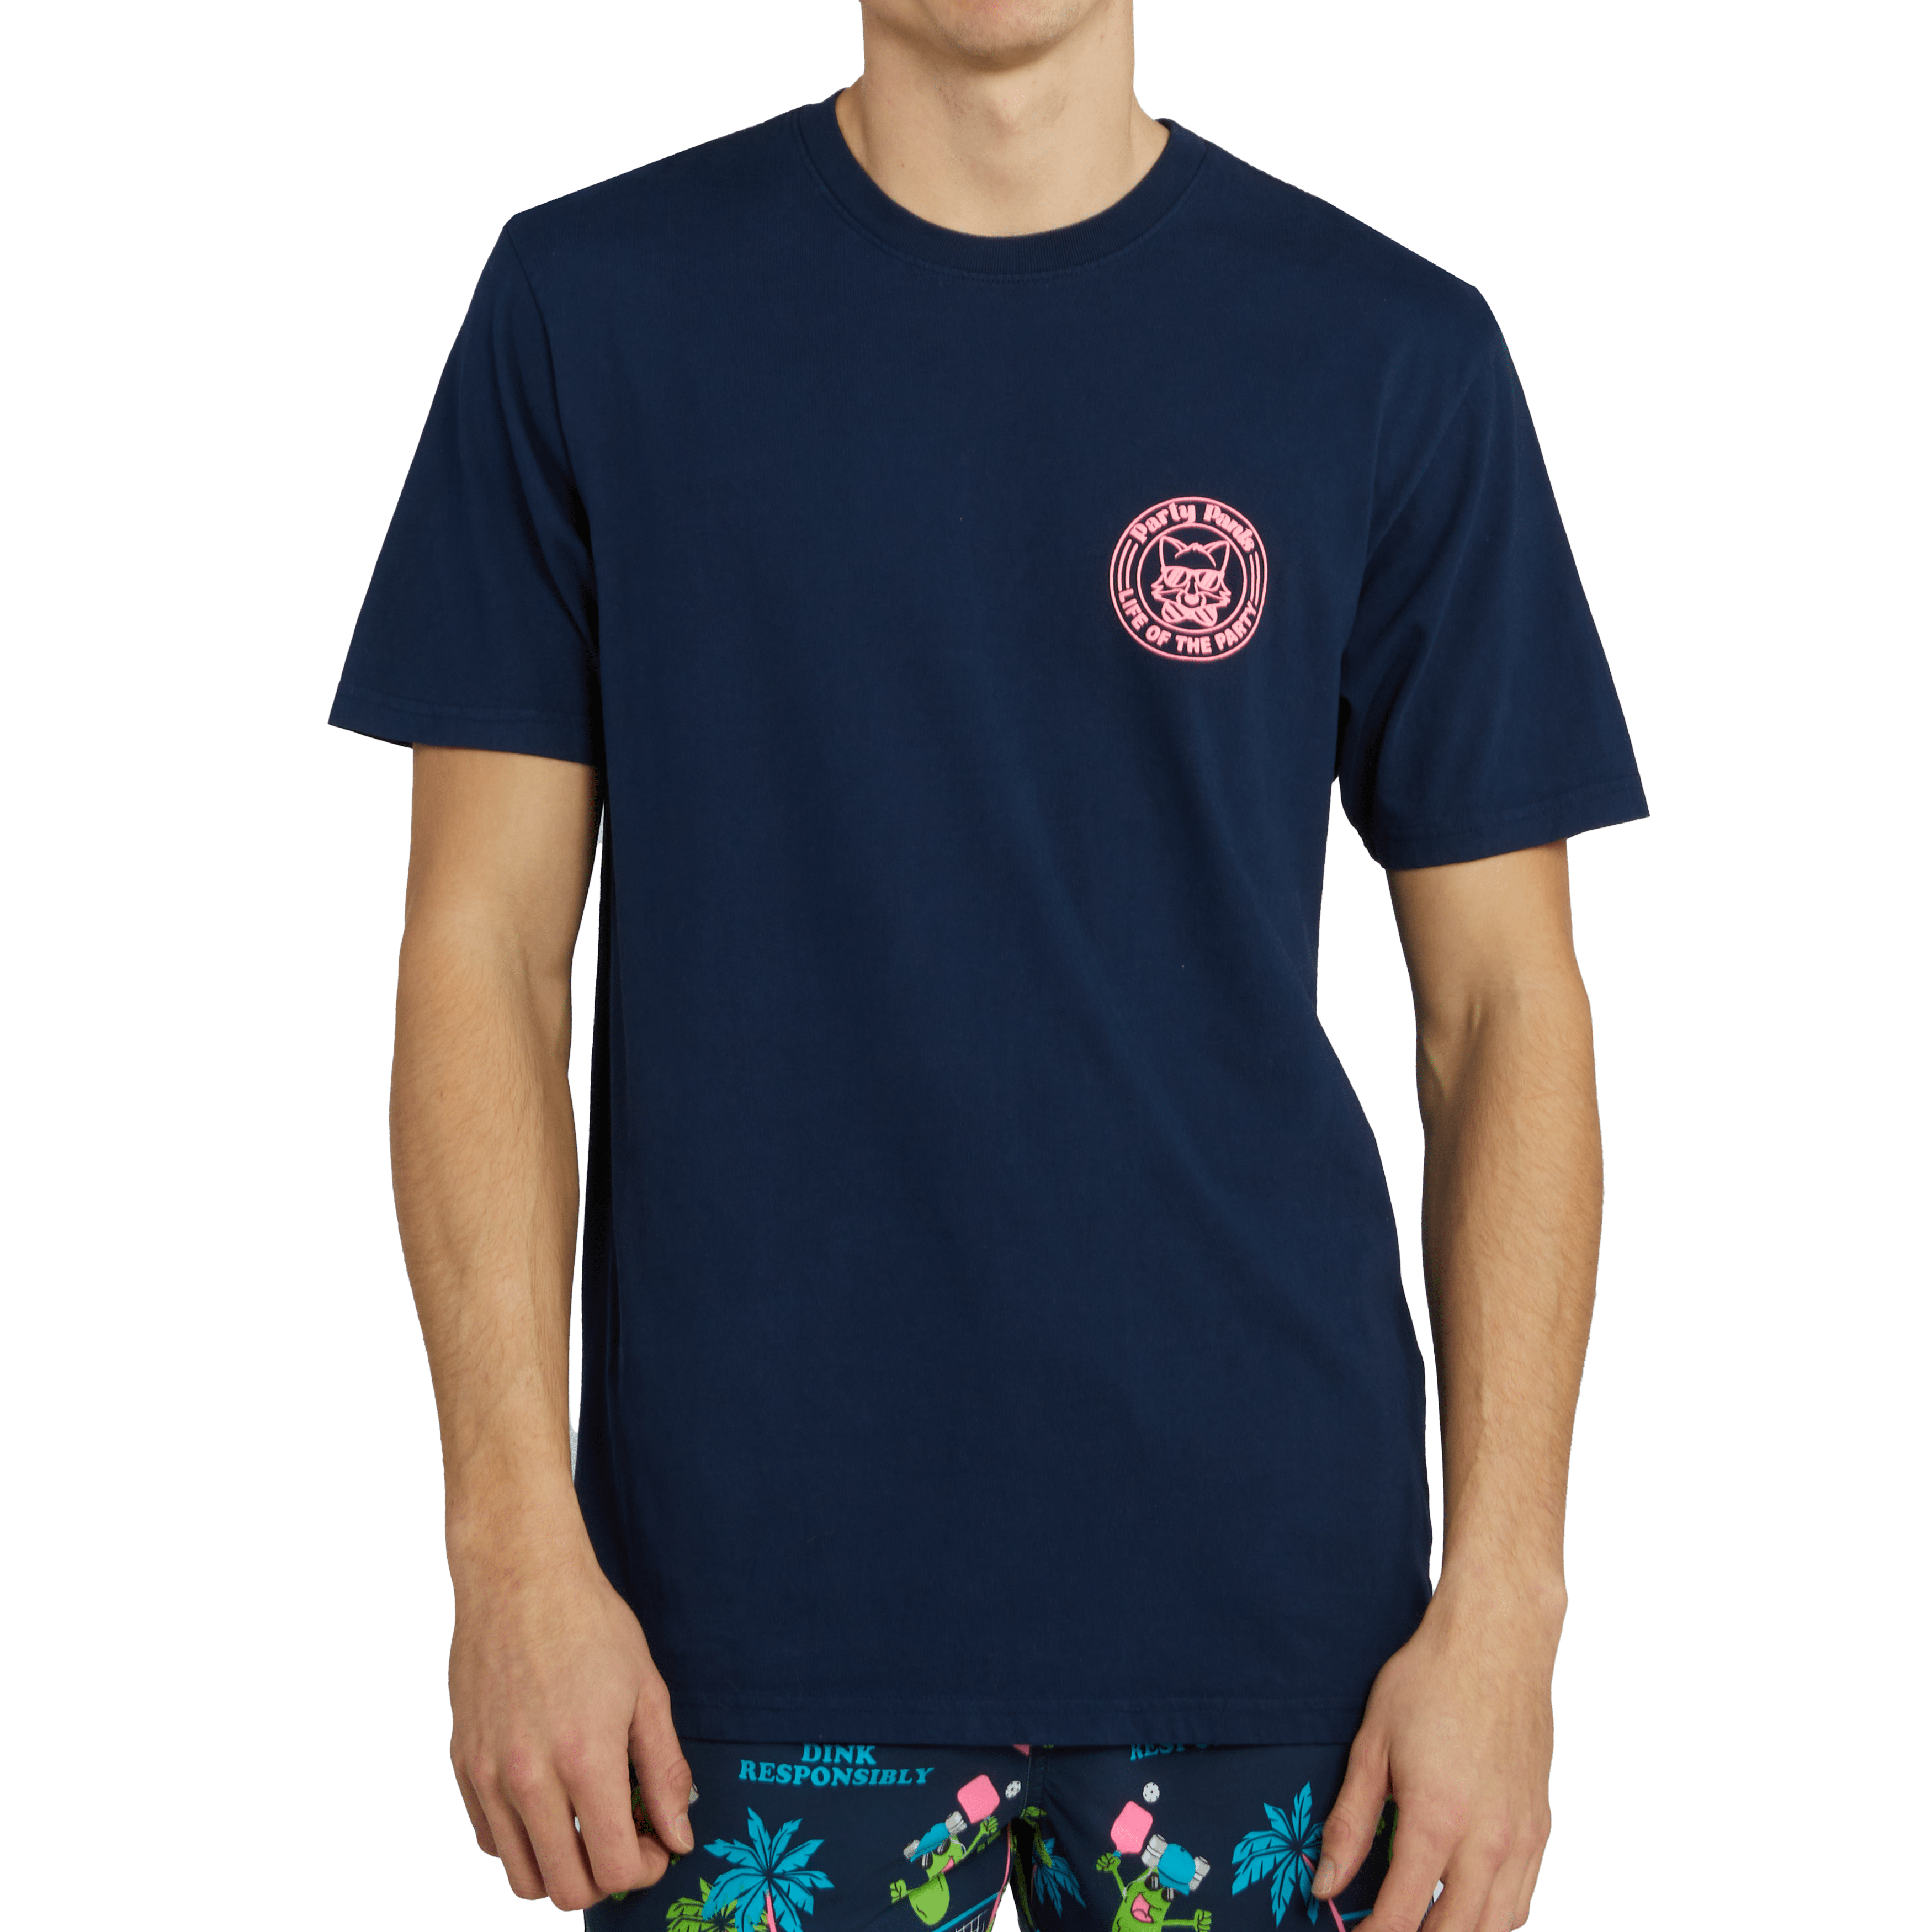 HEAVY DINKERS T-SHIRT - NAVY TEE PARTY PANTS 